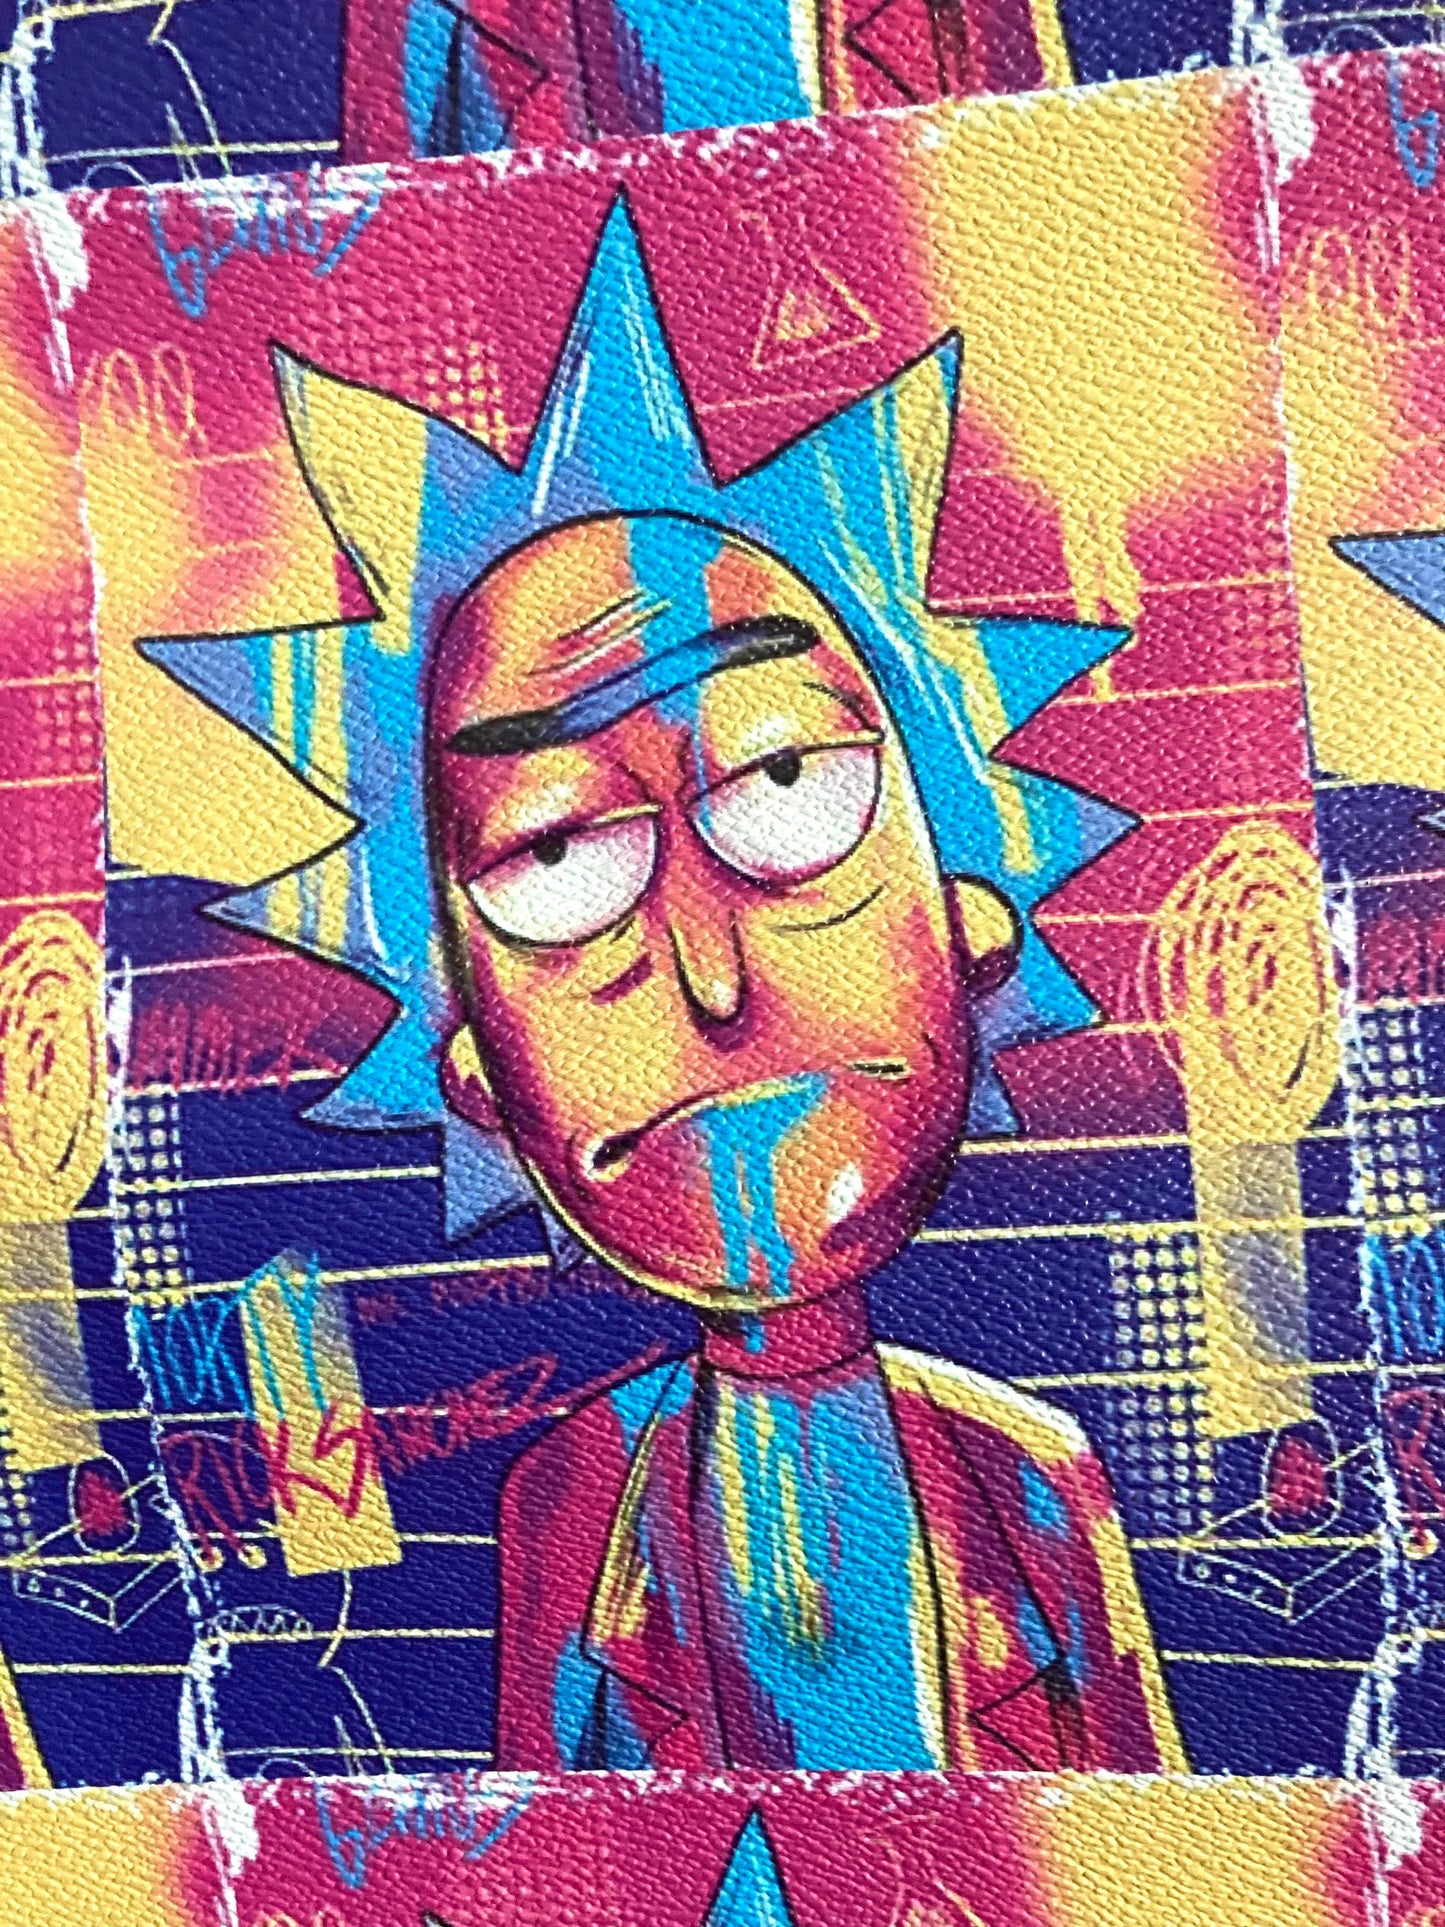 Rick and Morty Printing Leather Handmade Material for Sneakers Custom